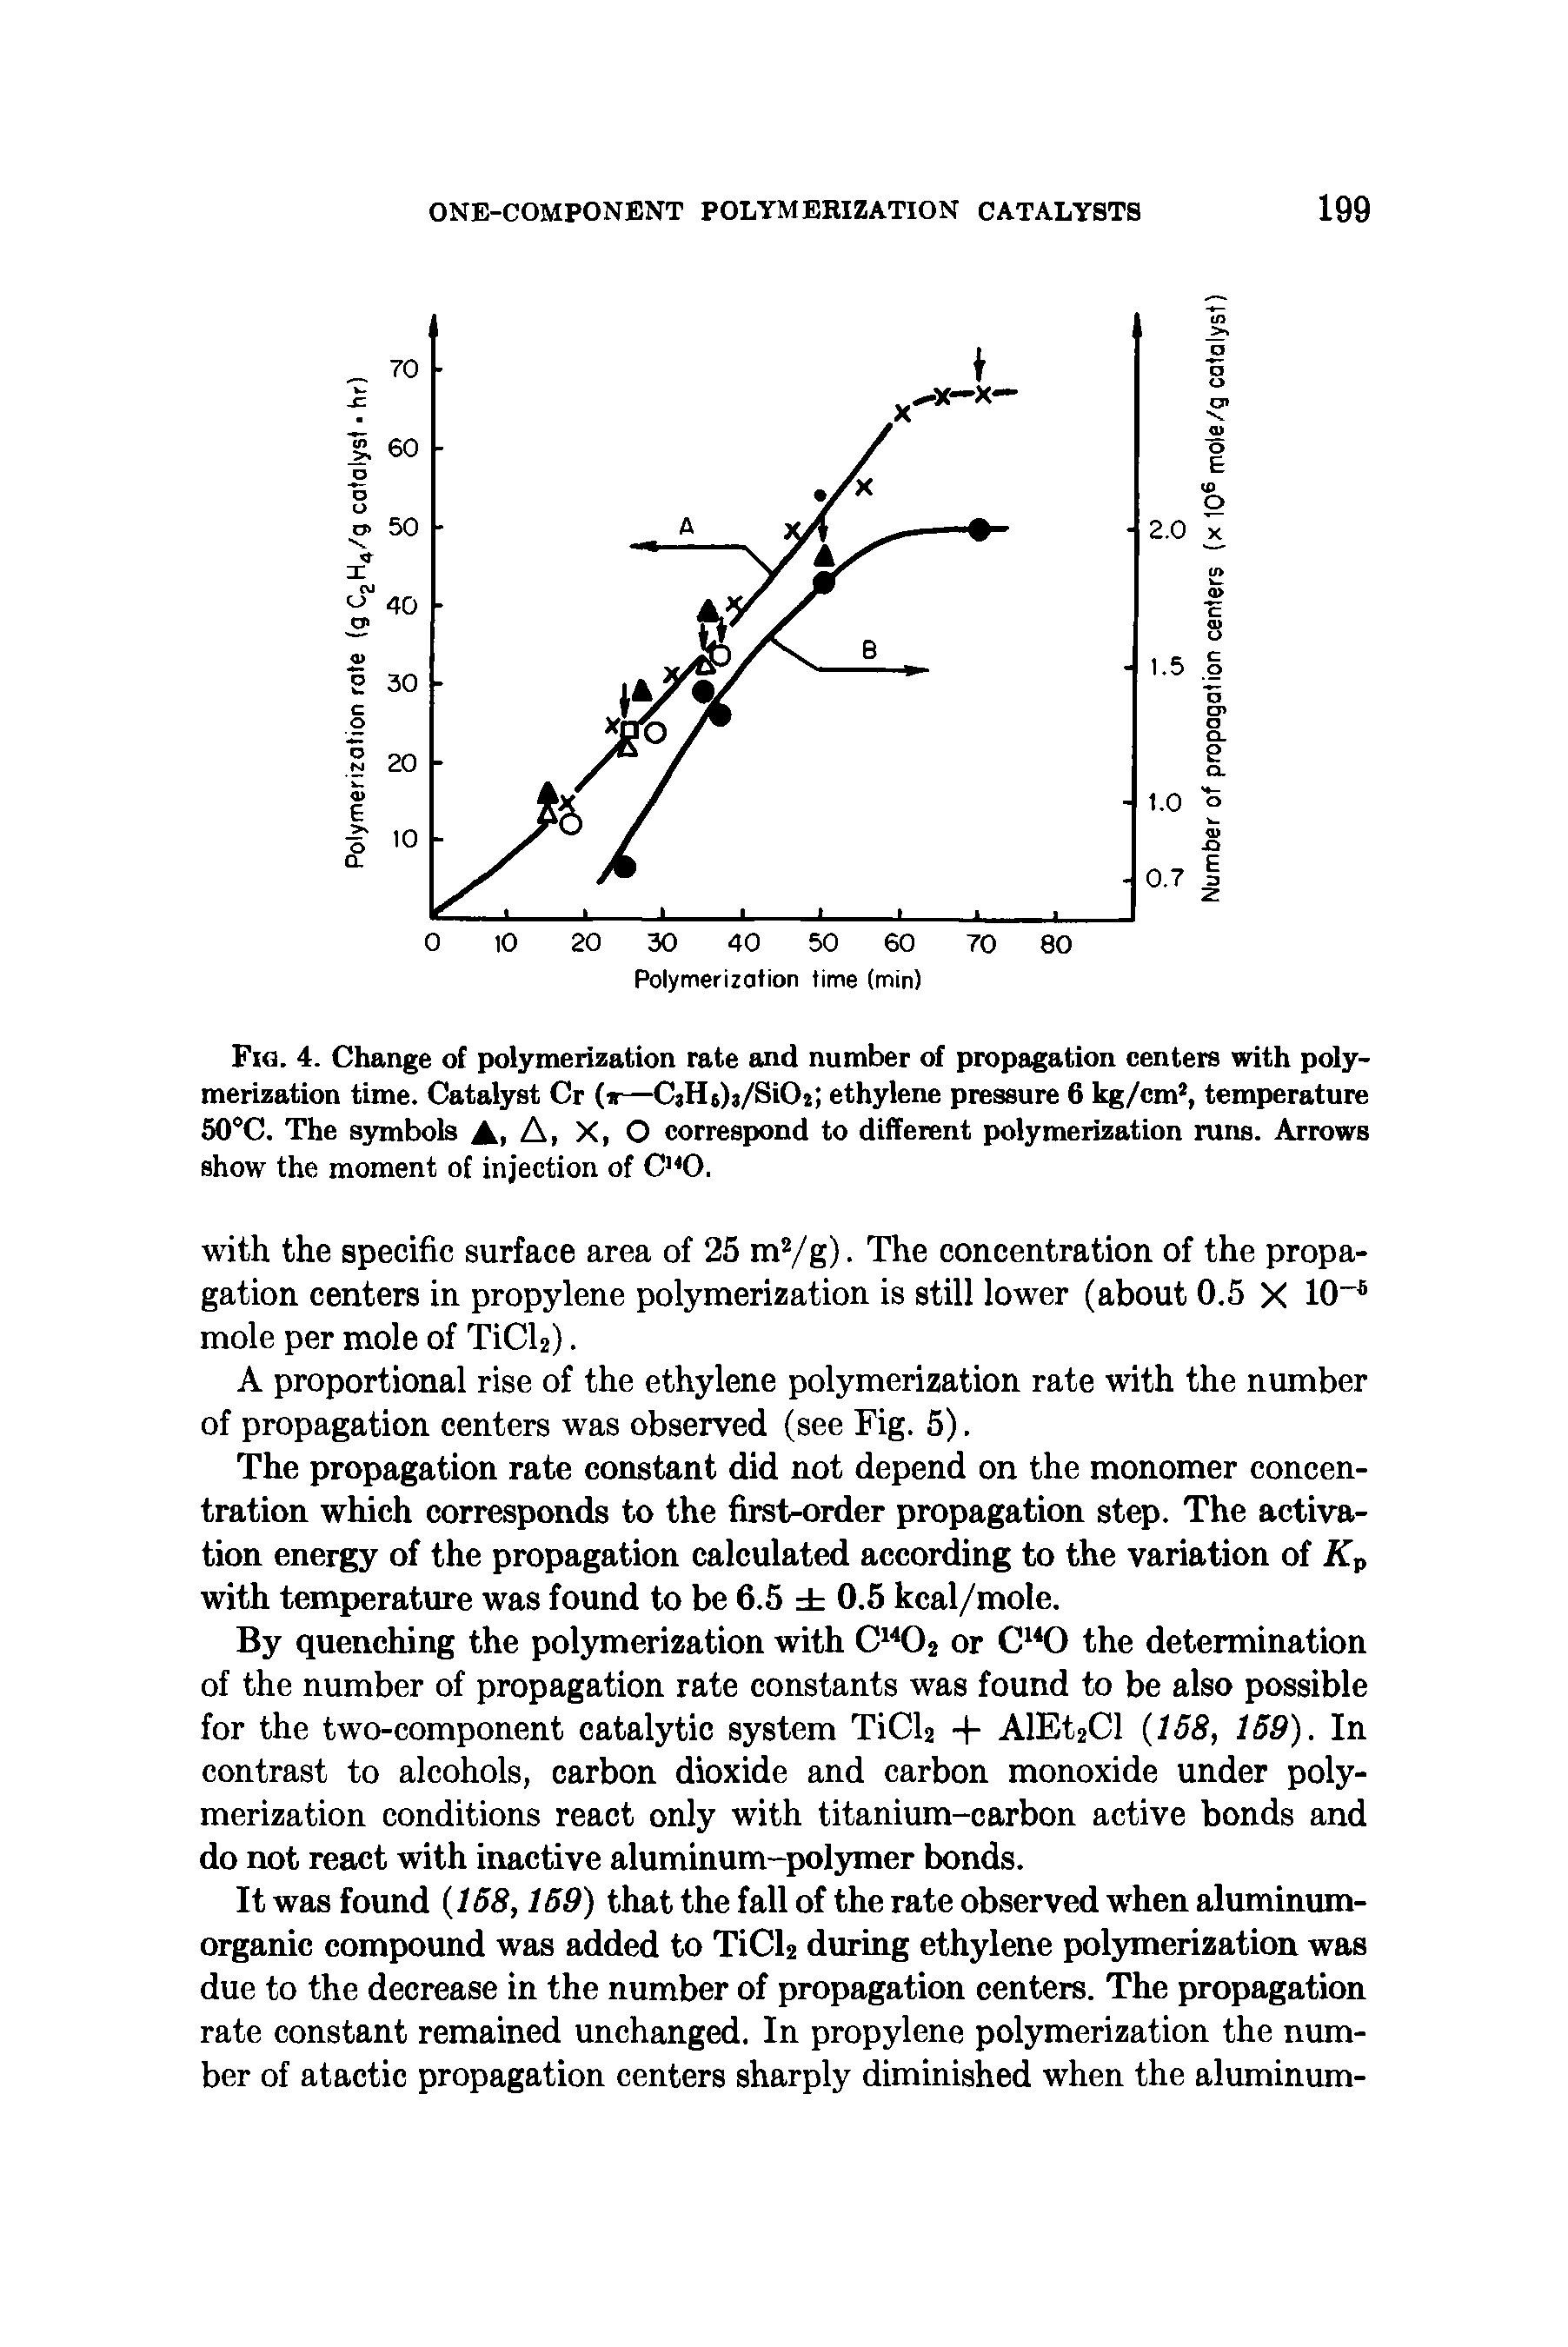 Fig. 4. Change of polymerization rate and number of propagation centers with polymerization time. Catalyst Cr ( —CjH6)j/Si02 ethylene pressure 6 kg/cm2, temperature 50°C. The symbols A, A, X, O correspond to different polymerization runs. Arrows show the moment of injection of C140.